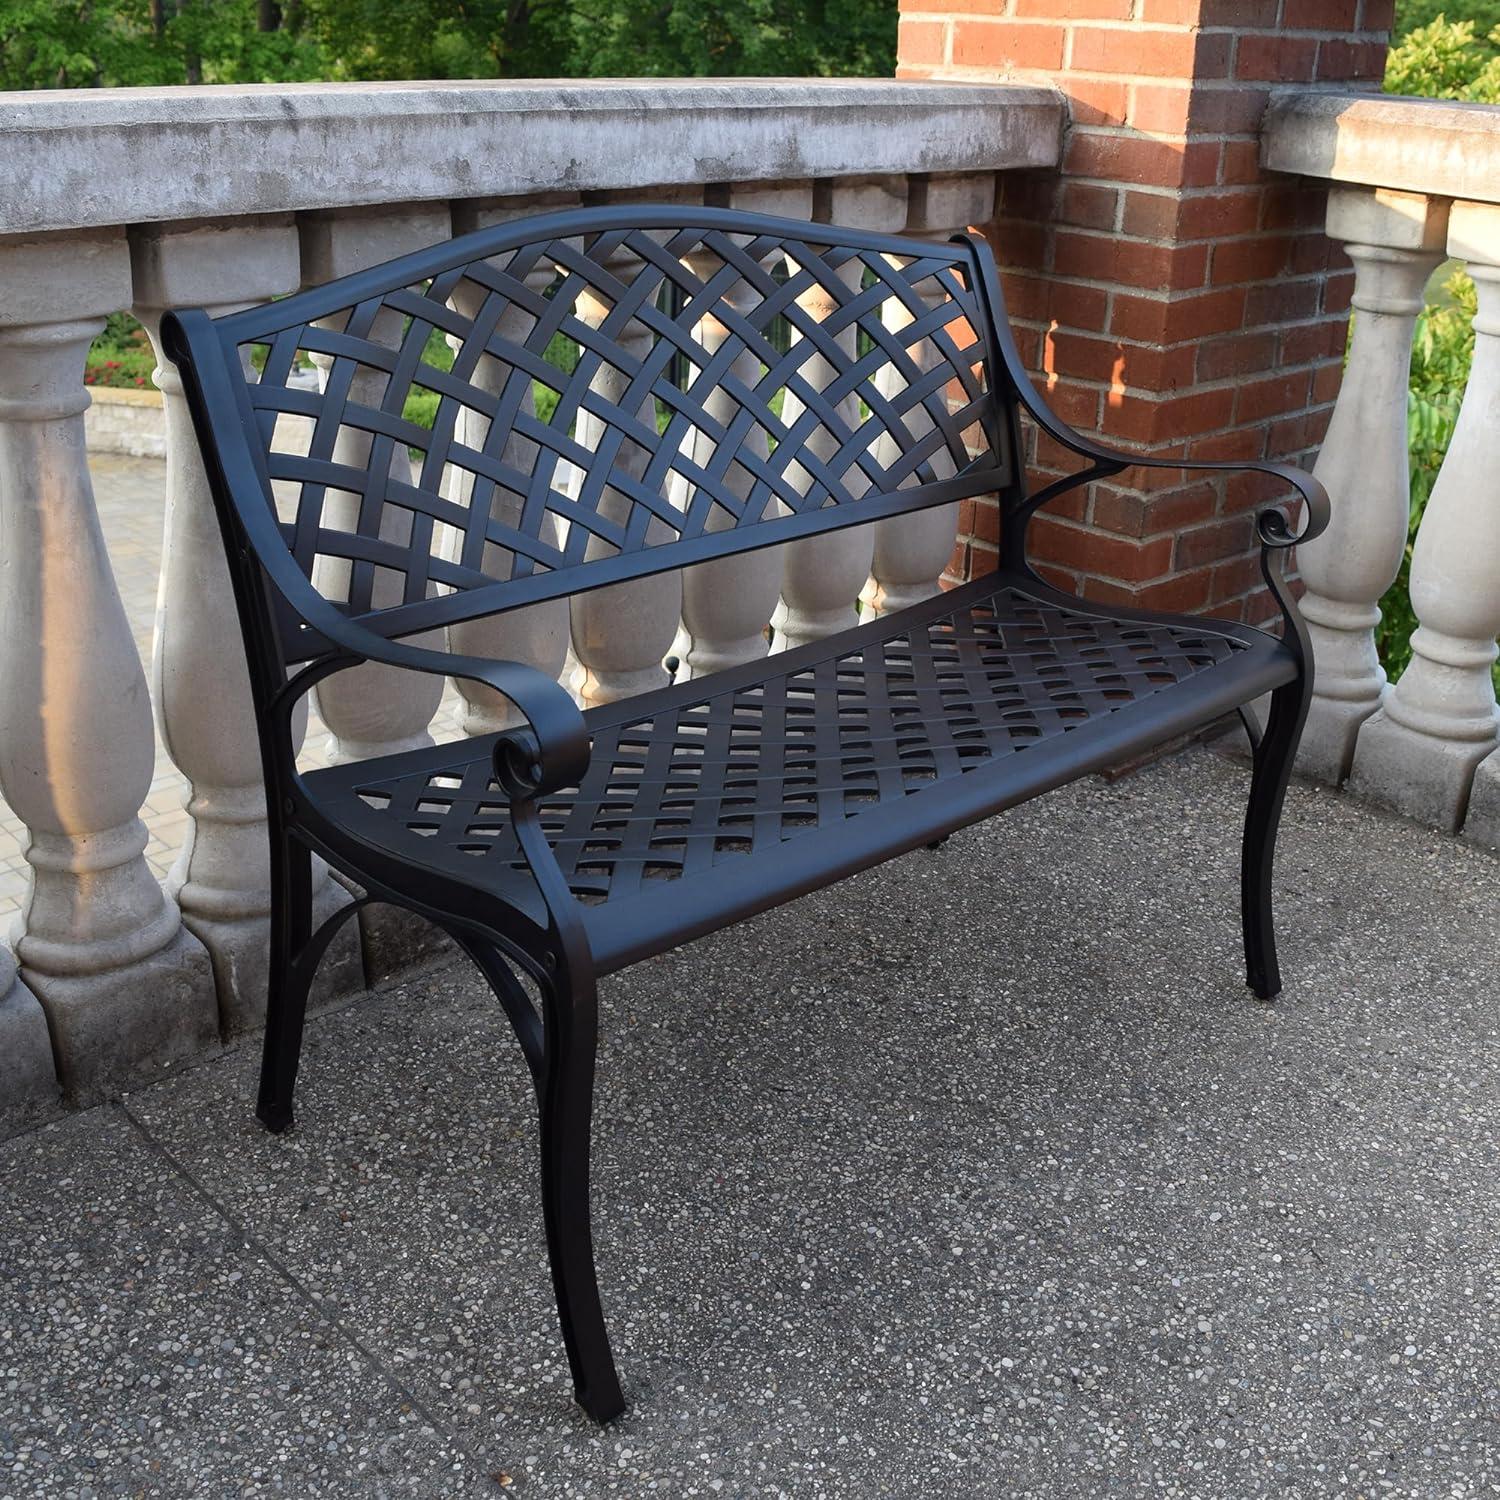 Luxury Arched Black Cast Aluminum Outdoor Loveseat Bench